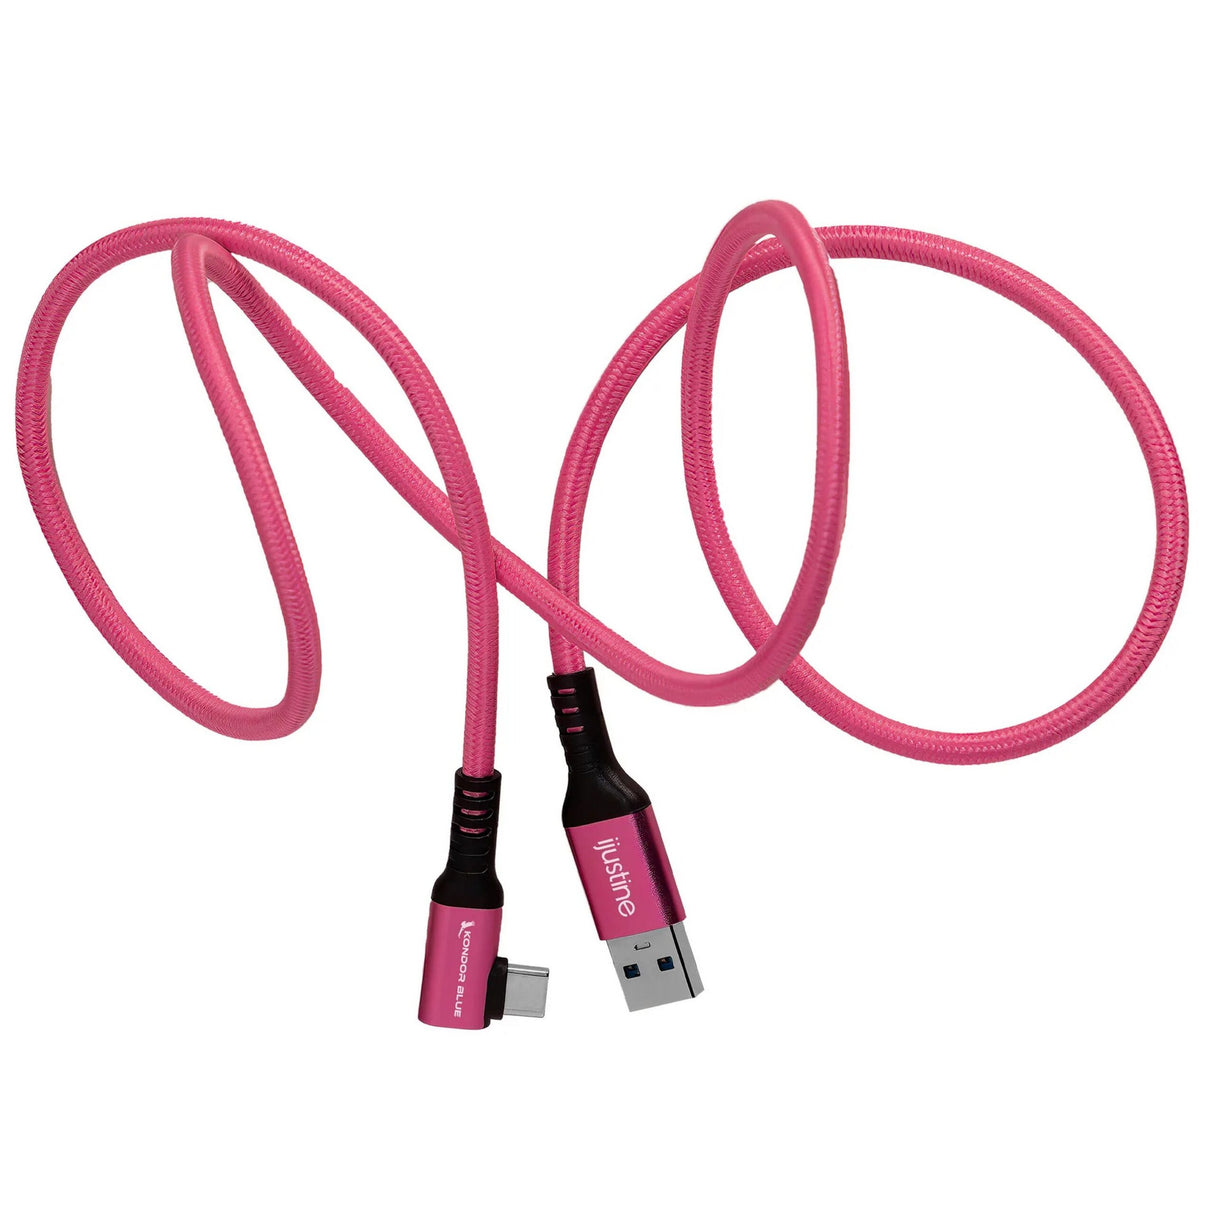 Kondor Blue KB-USBCA-RA-3-J iJustine Pink USB-A to USB-C 3.0 Right Angle High Speed Data and Charging Cable, 3-Feet